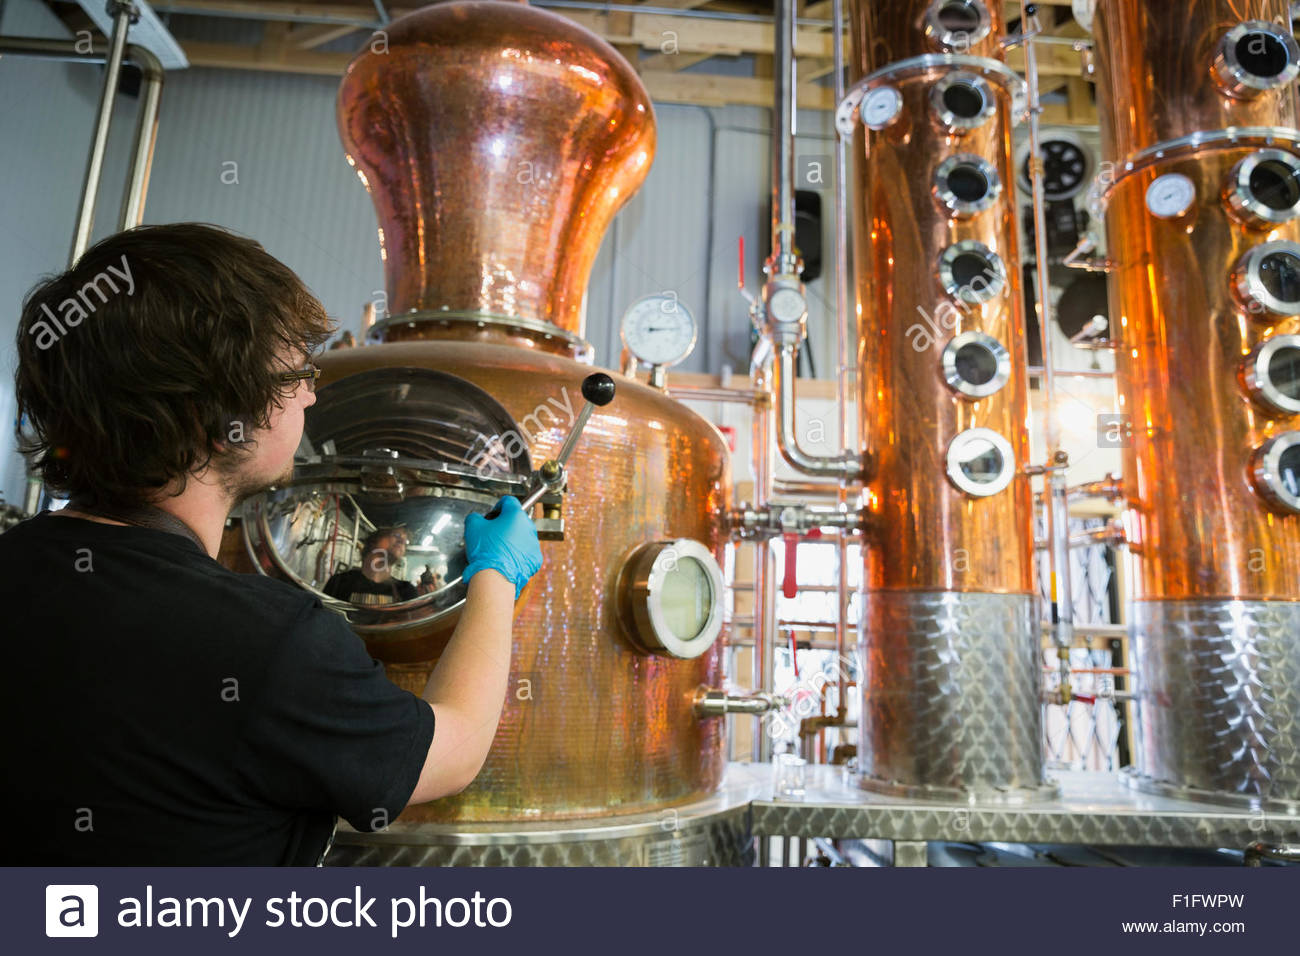 Worker checking copper distillery vats Stock Photo